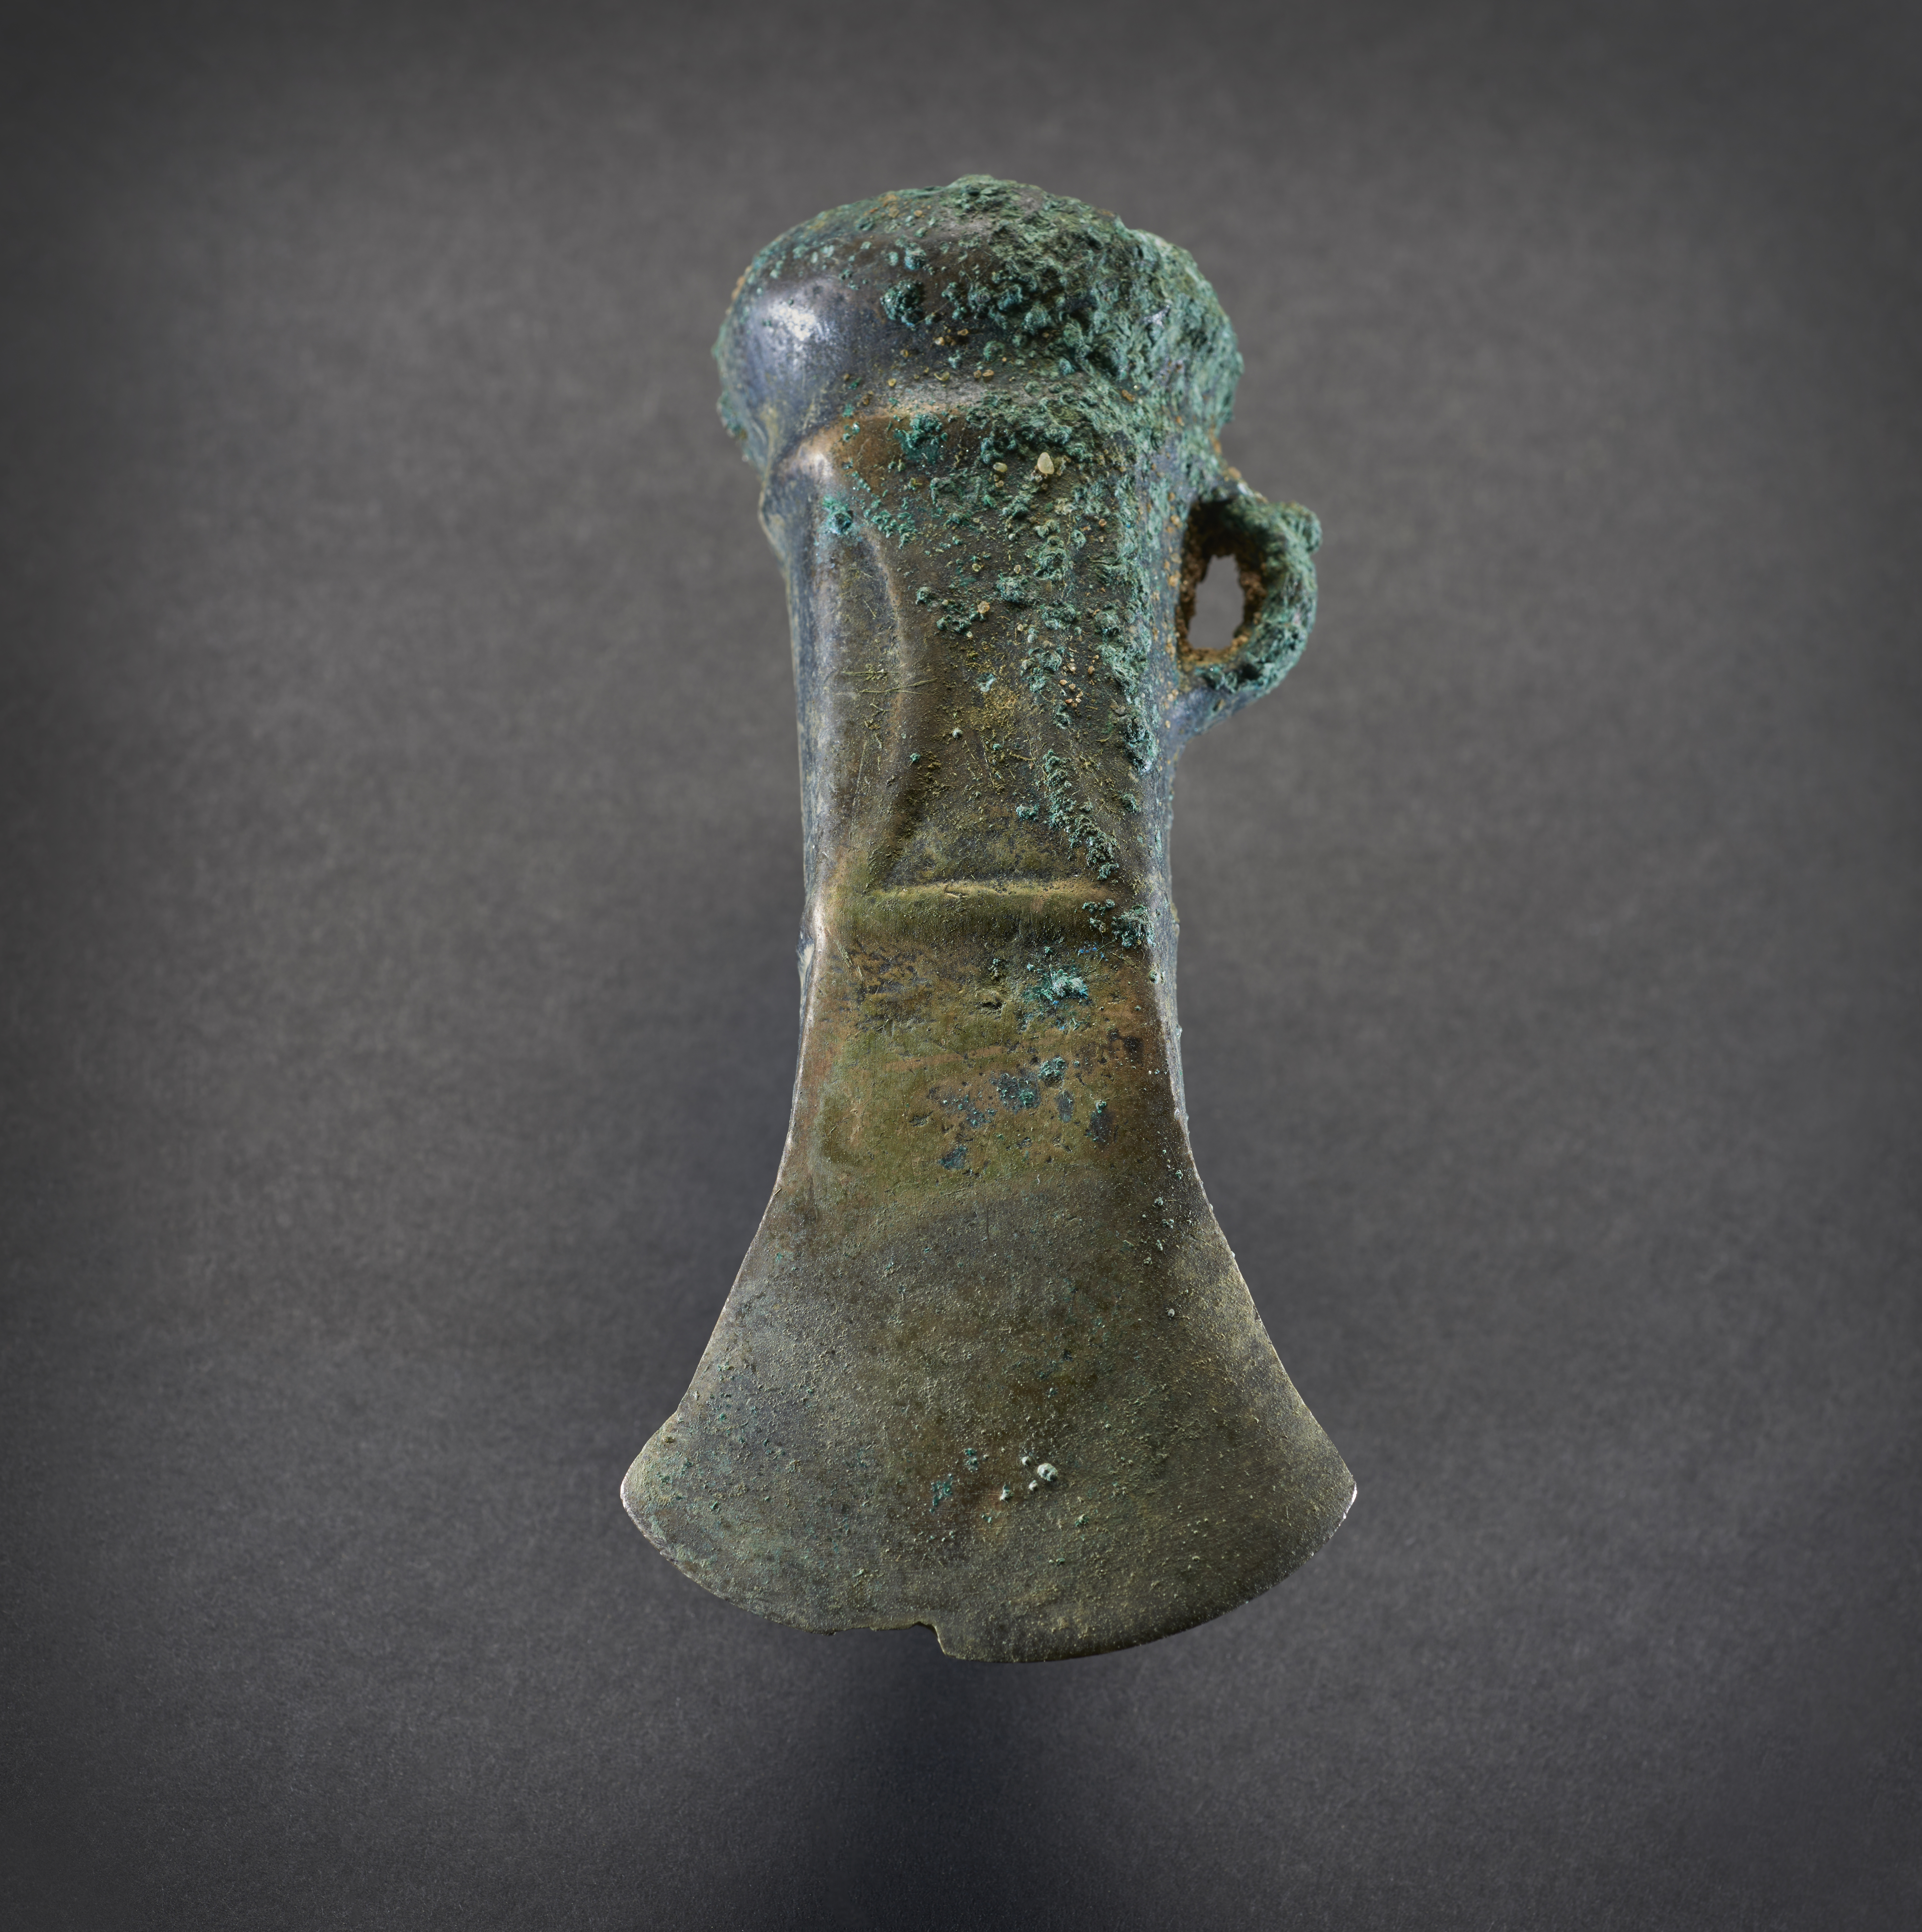 A Bronze Age axe head from the Havering Hoard 